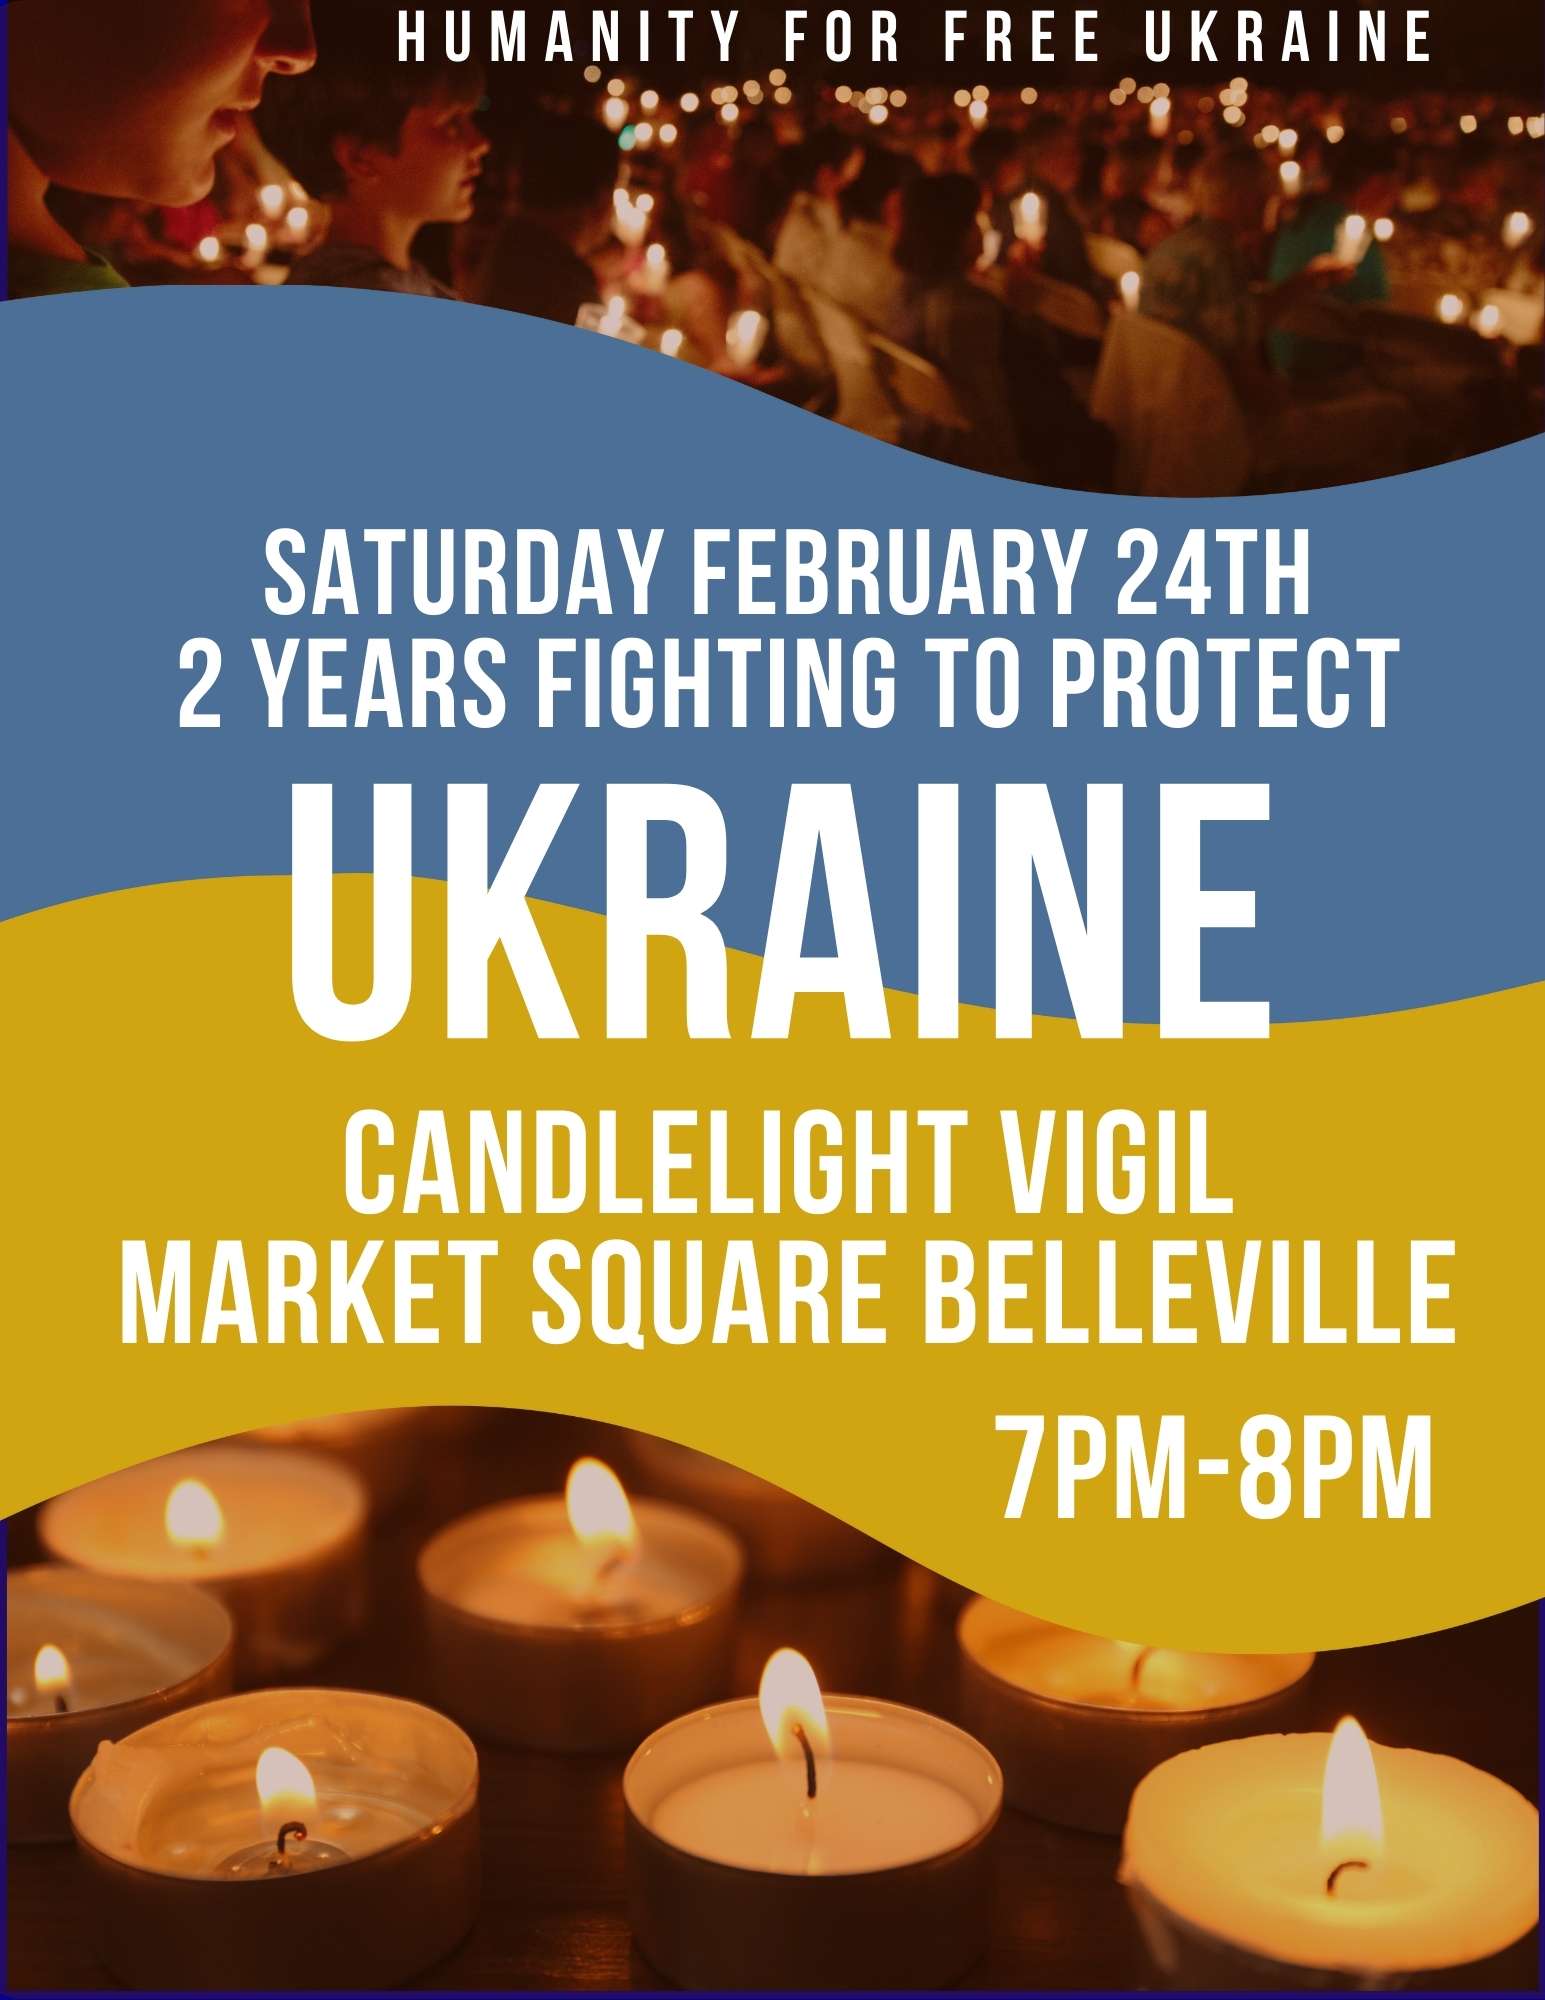 Poster with Ukraine flag and candles. Titled Ukraine Candlelight Vigil